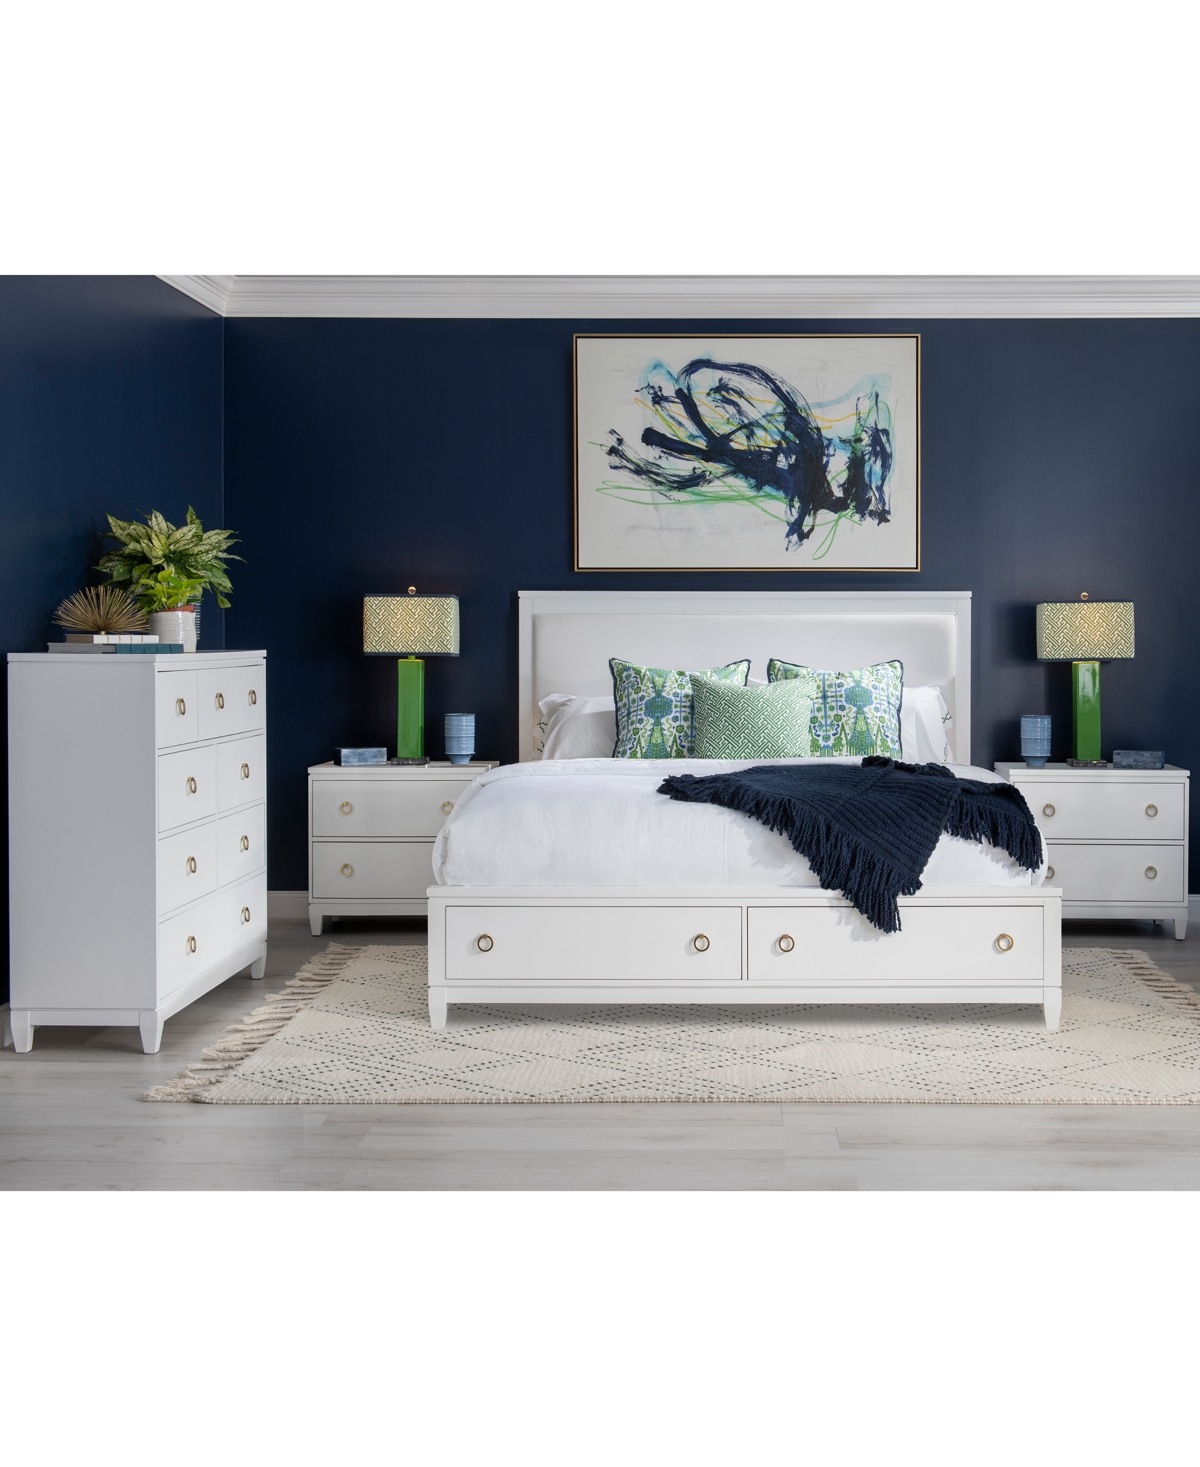 Shop Furniture Summerland 3pc Bedroom Set (california King Upholstered Storage Bed, Chest, Nightstand) In White